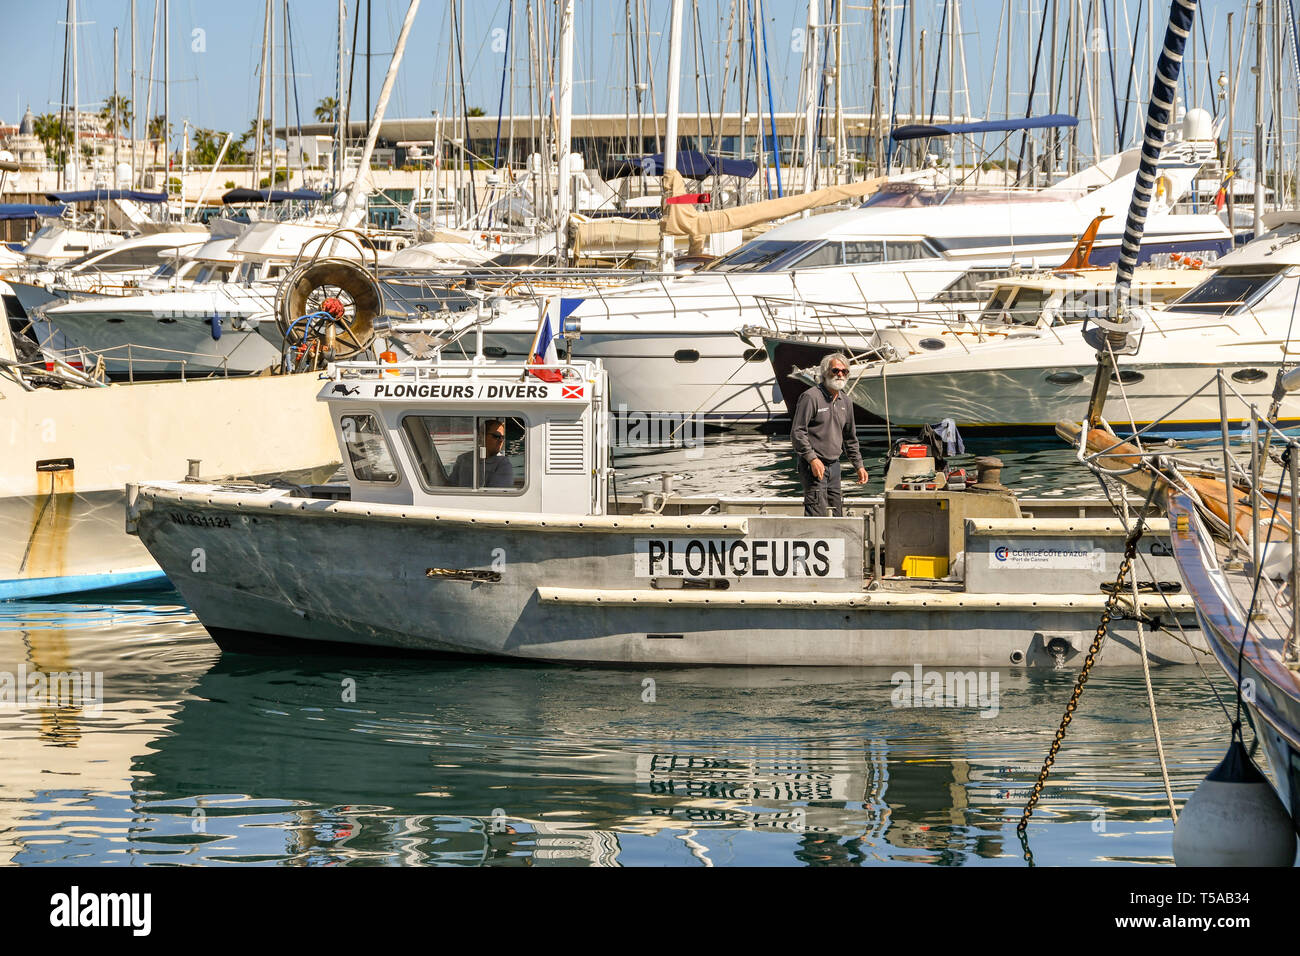 CANNES, FRANCE - APRIL 2019: Diving boat with people on board arriving in the harbour in Cannes. Stock Photo